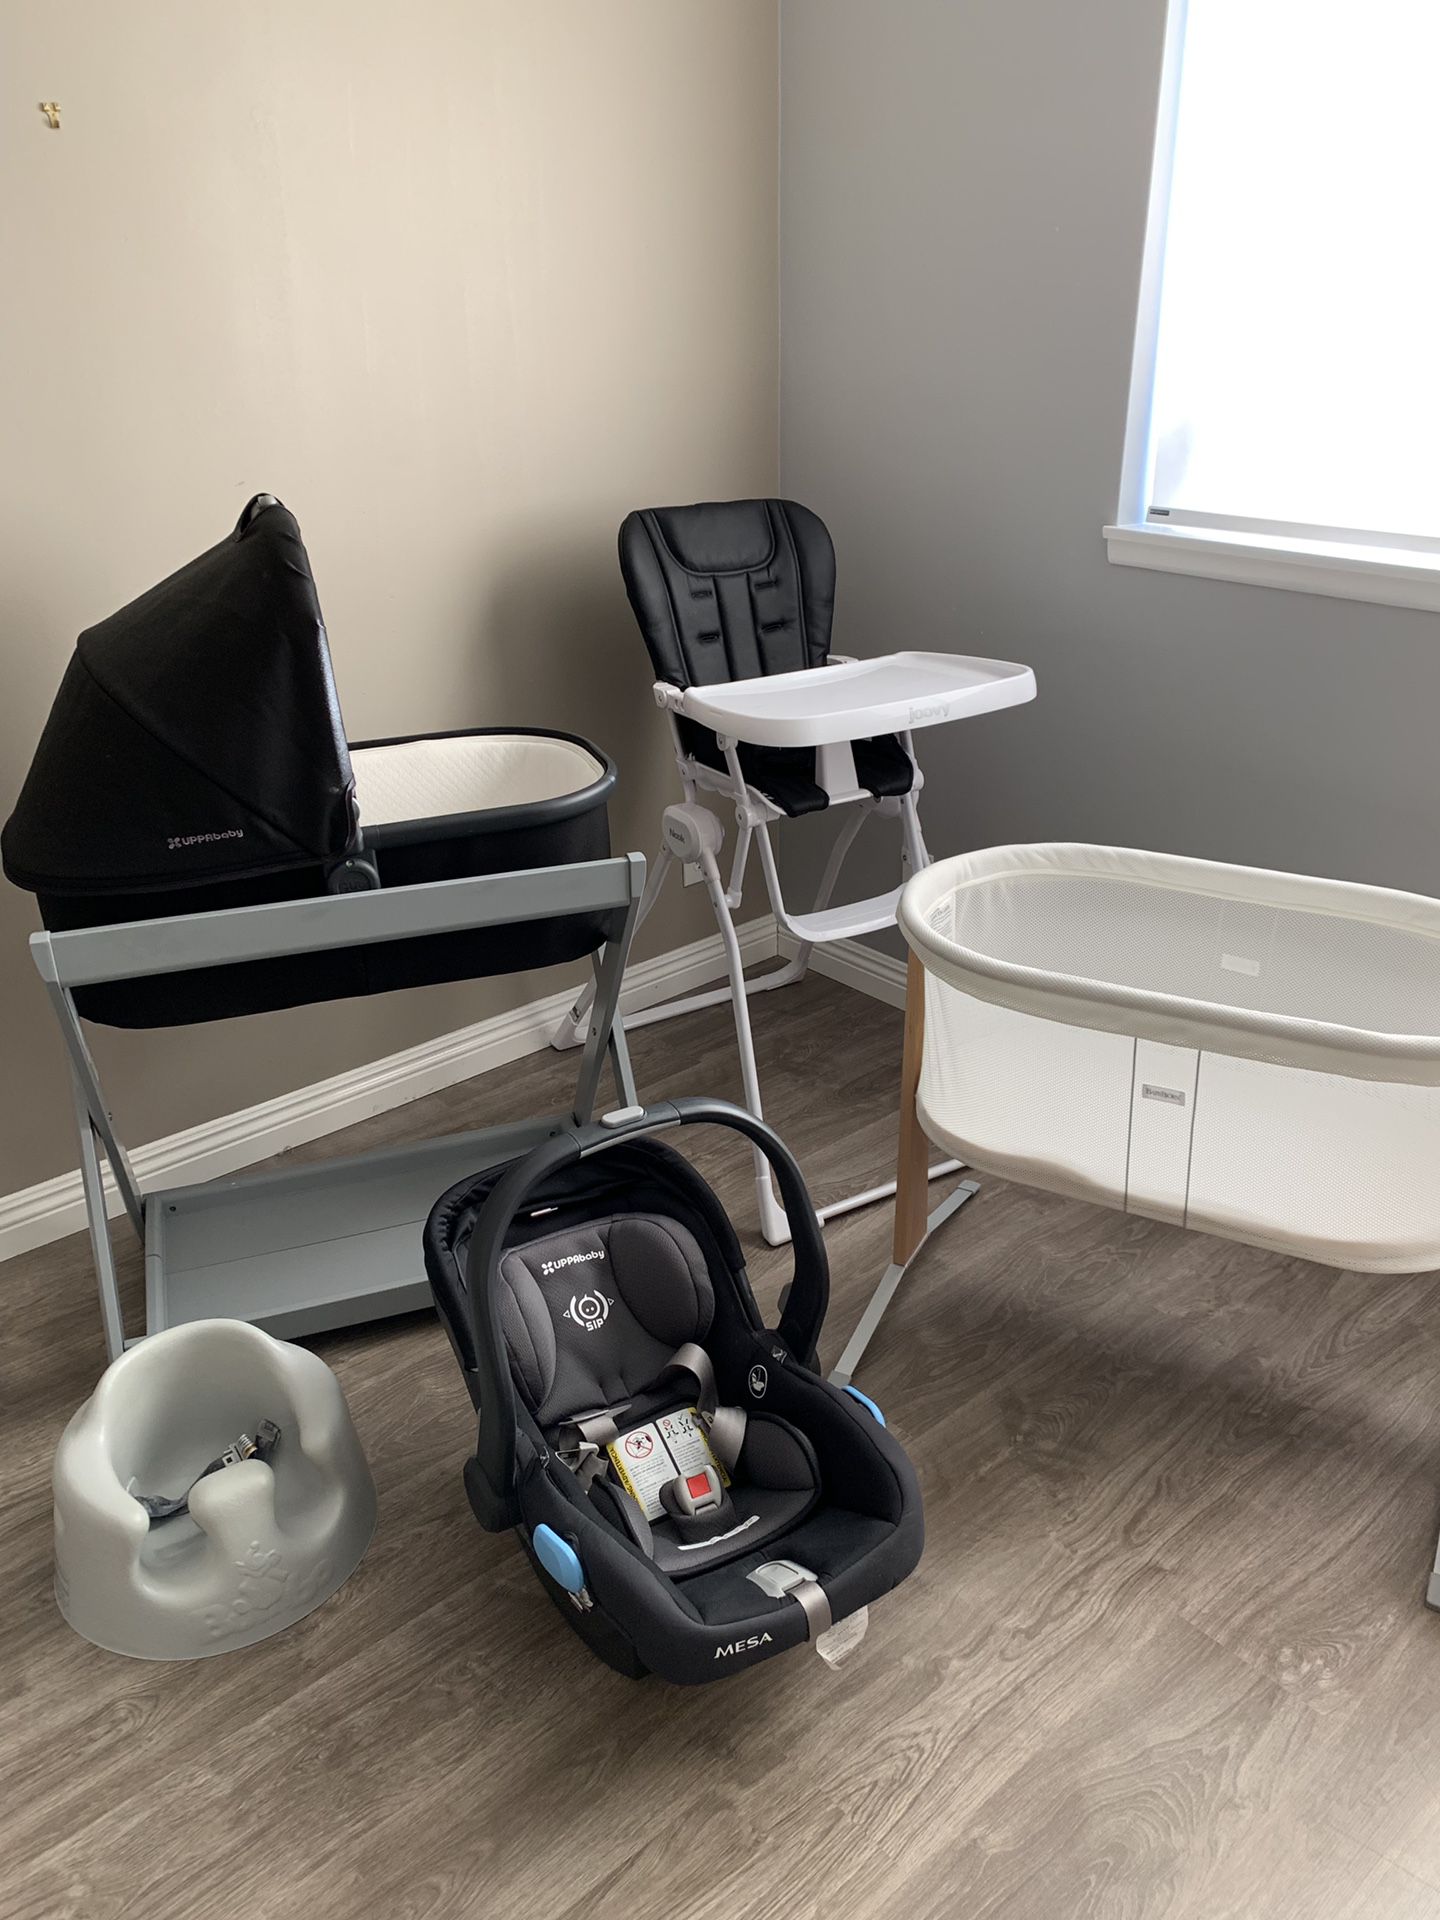 UppaBaby car seat & bassinet, Baby Bjorn bassinet, Joovy high chair, Bumbo seat